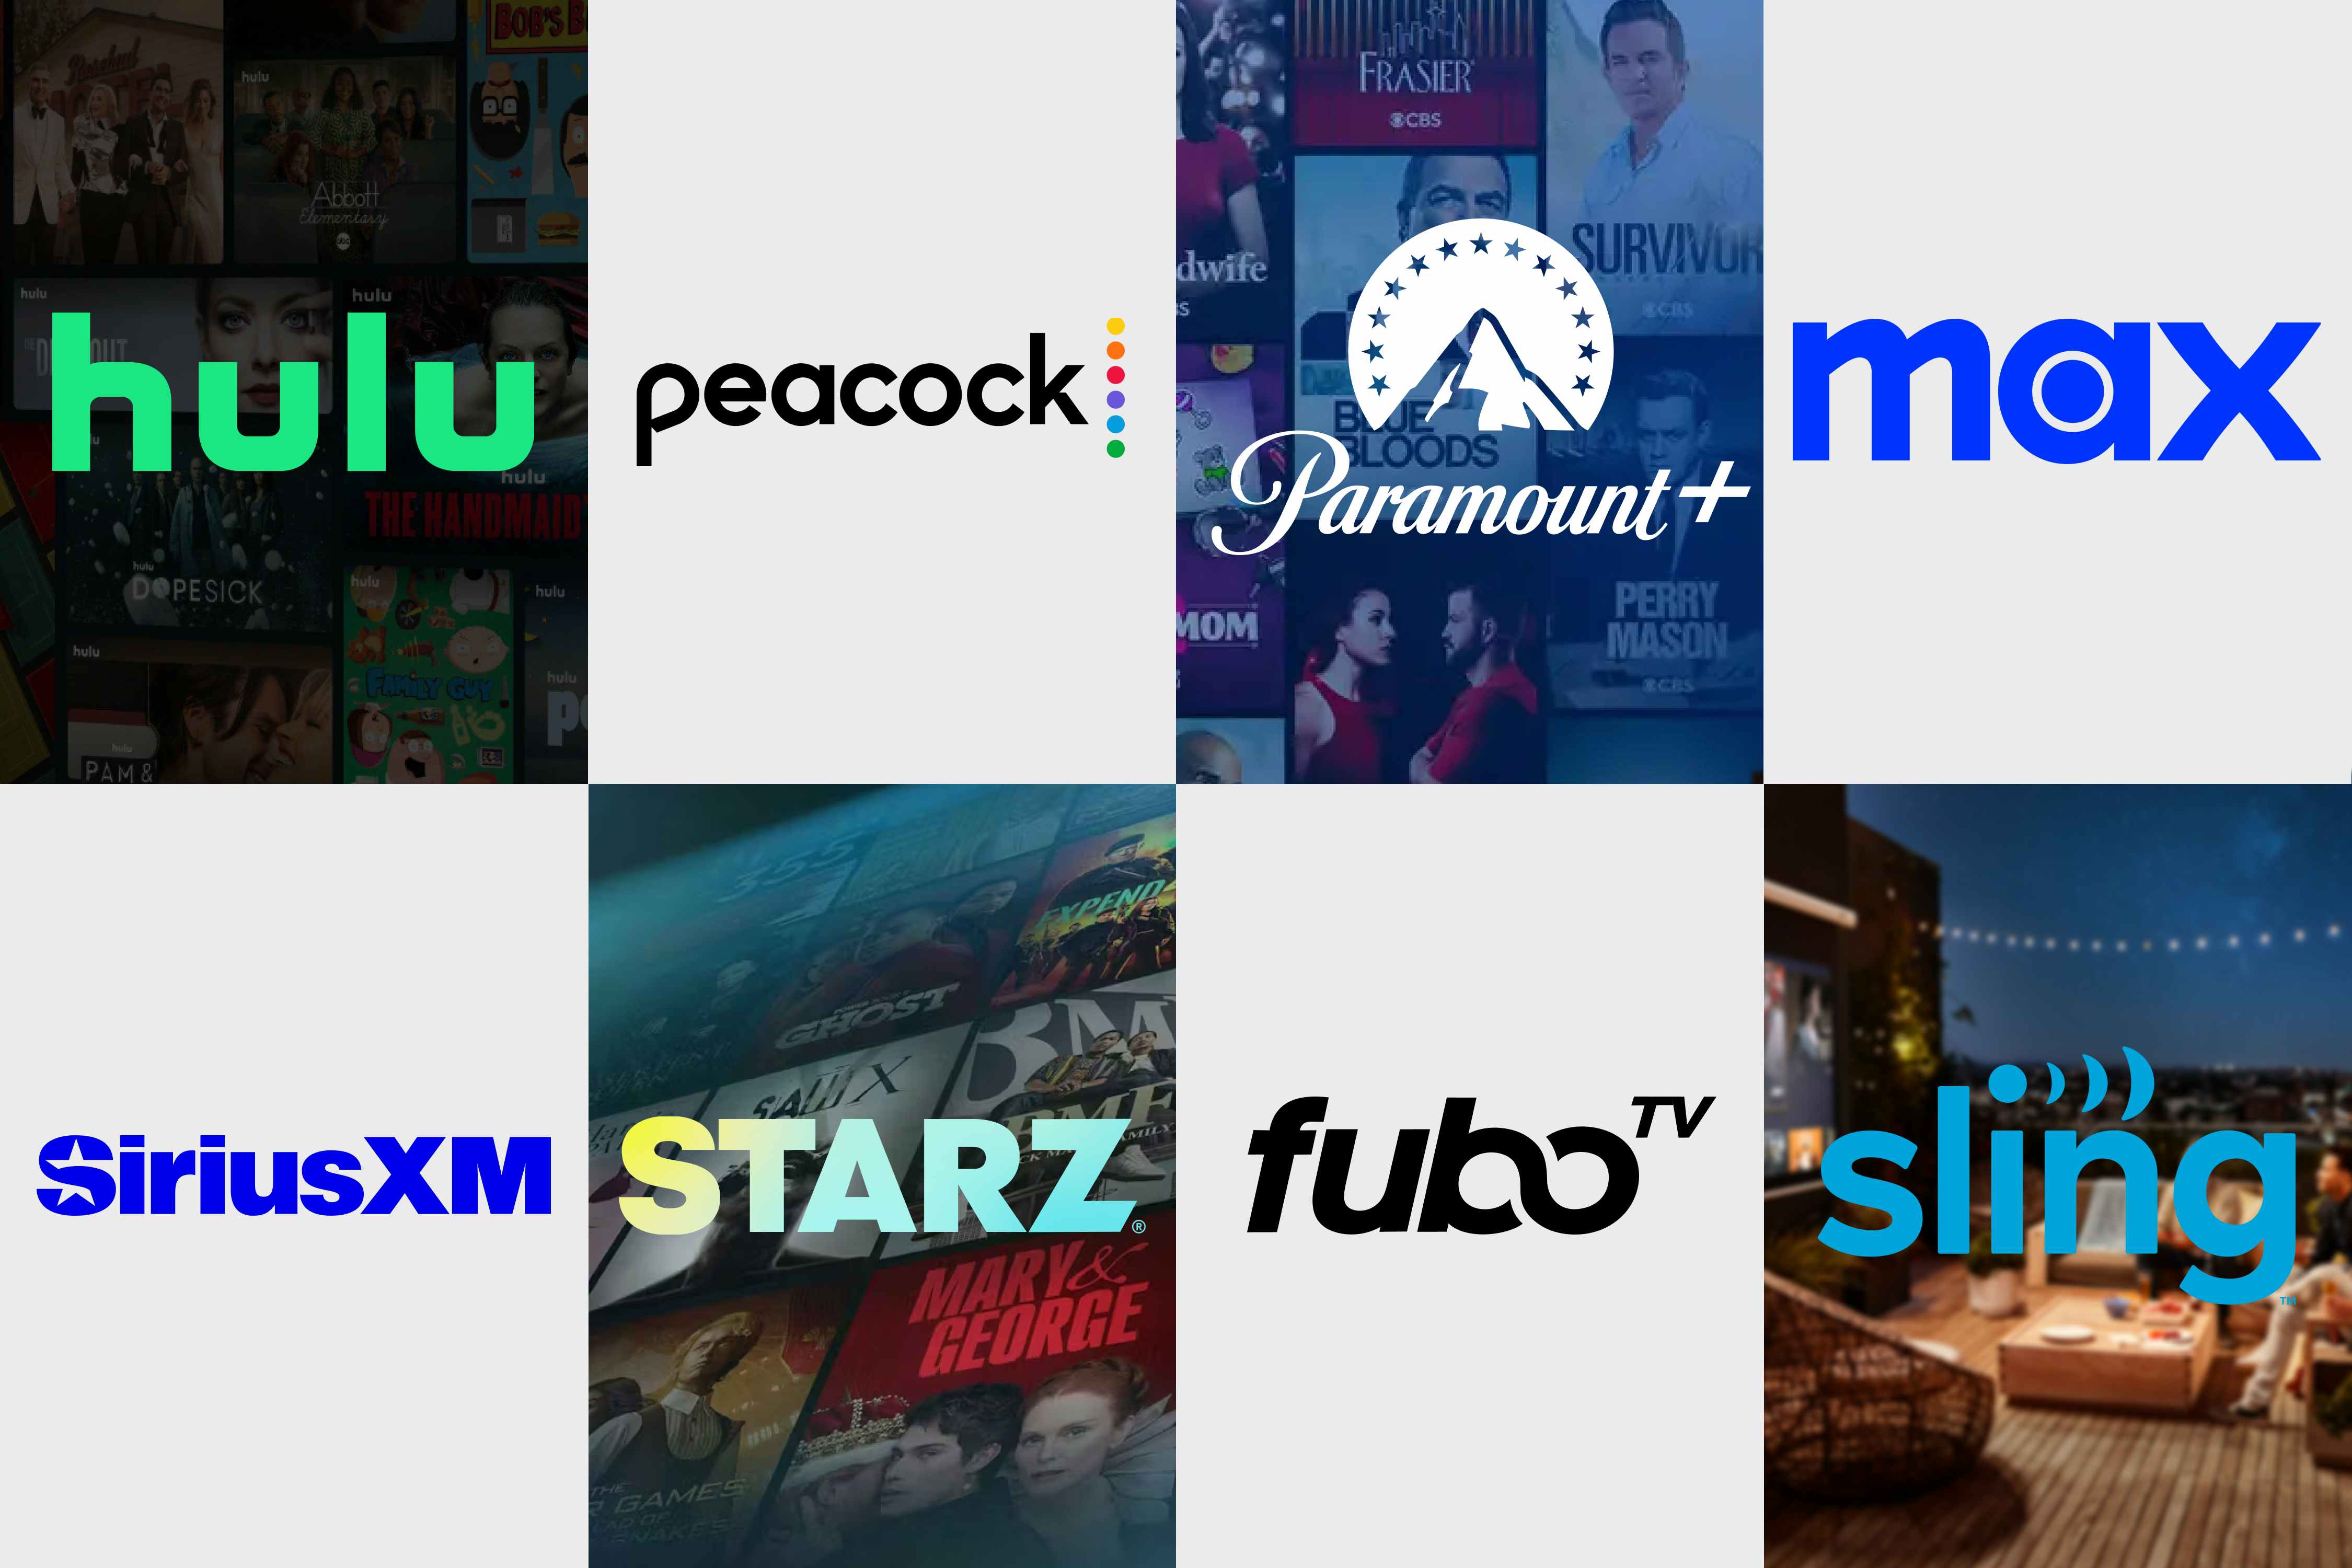 National Streaming Day Offers: Free 3-Day Hulu Trial, $3 Starz, $8 Max